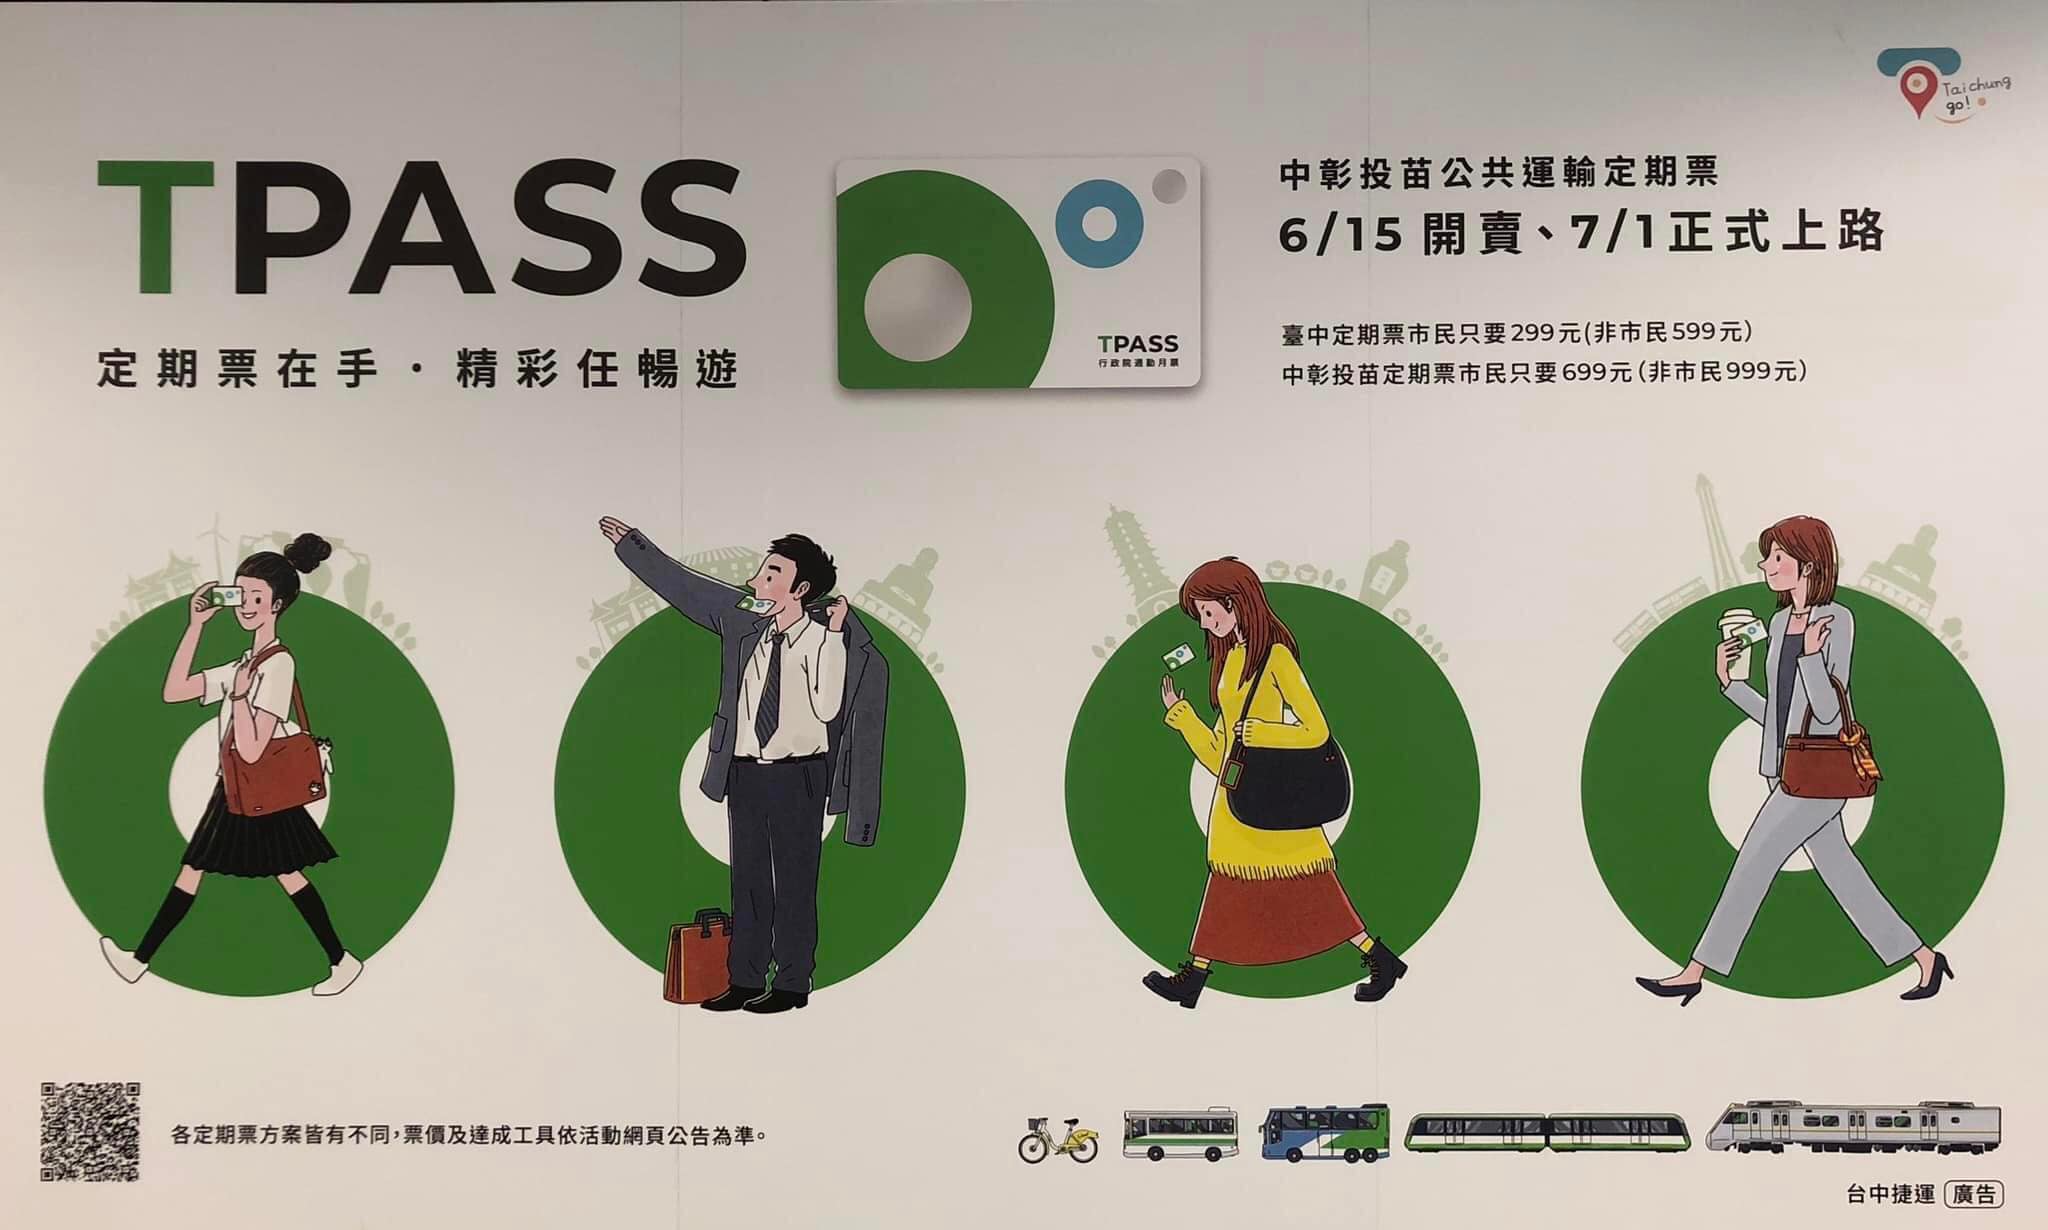 Now available, the Taichung Transportation Early-Bird Monthly Pass is eagerly purchased by over 10,000 individuals.  Photo reproduced from 陳永祥 Facebook